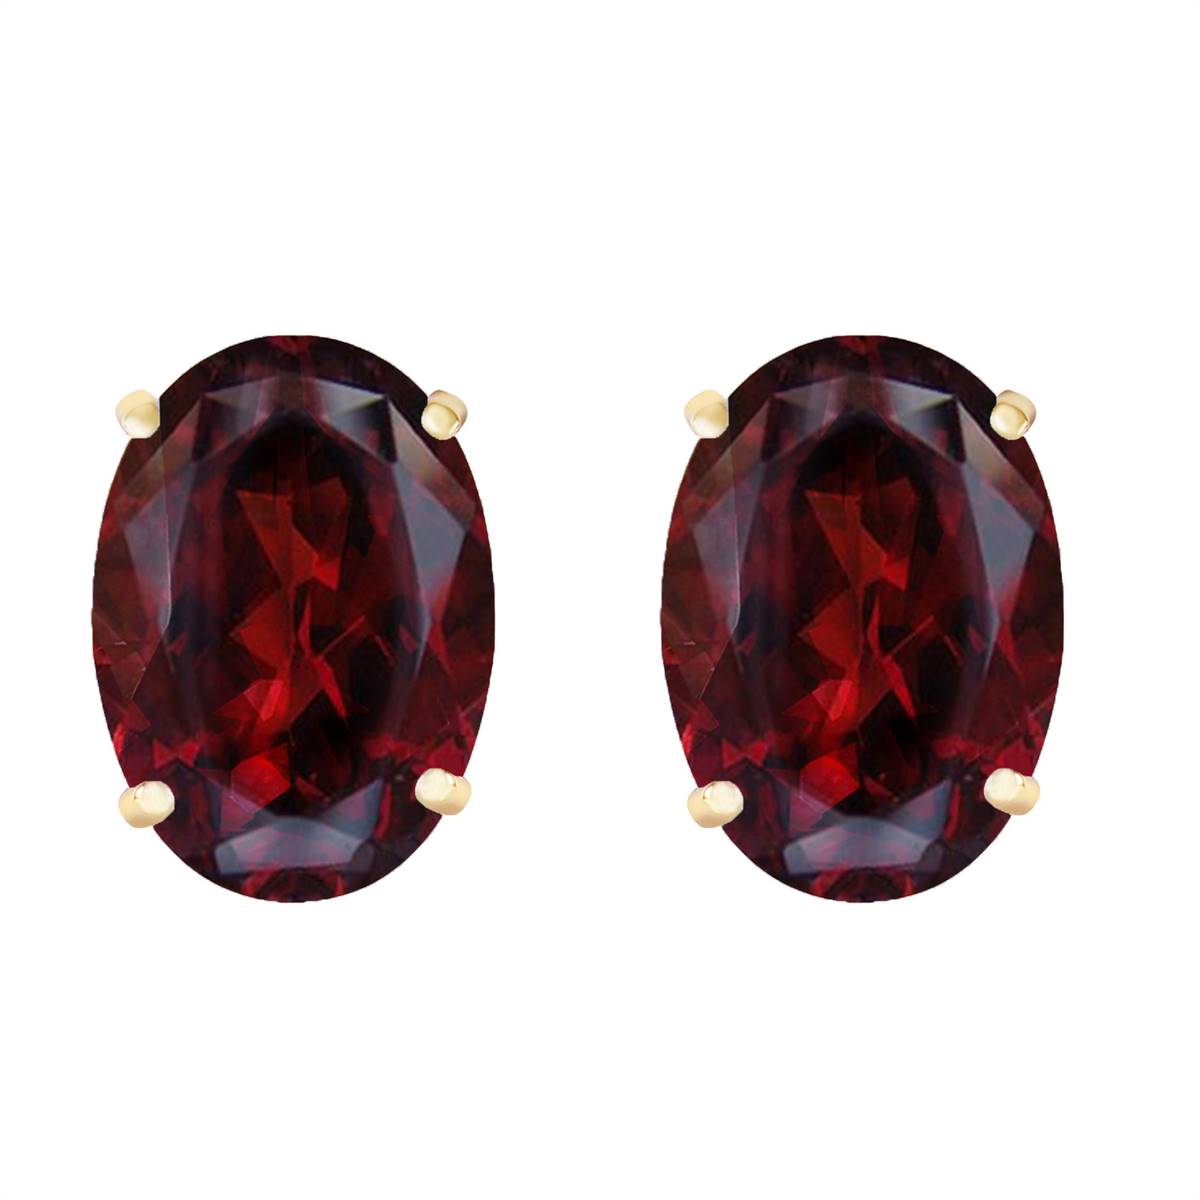 13 Carat 14K Solid Yellow Gold French Clips Earrings Natural Garnet